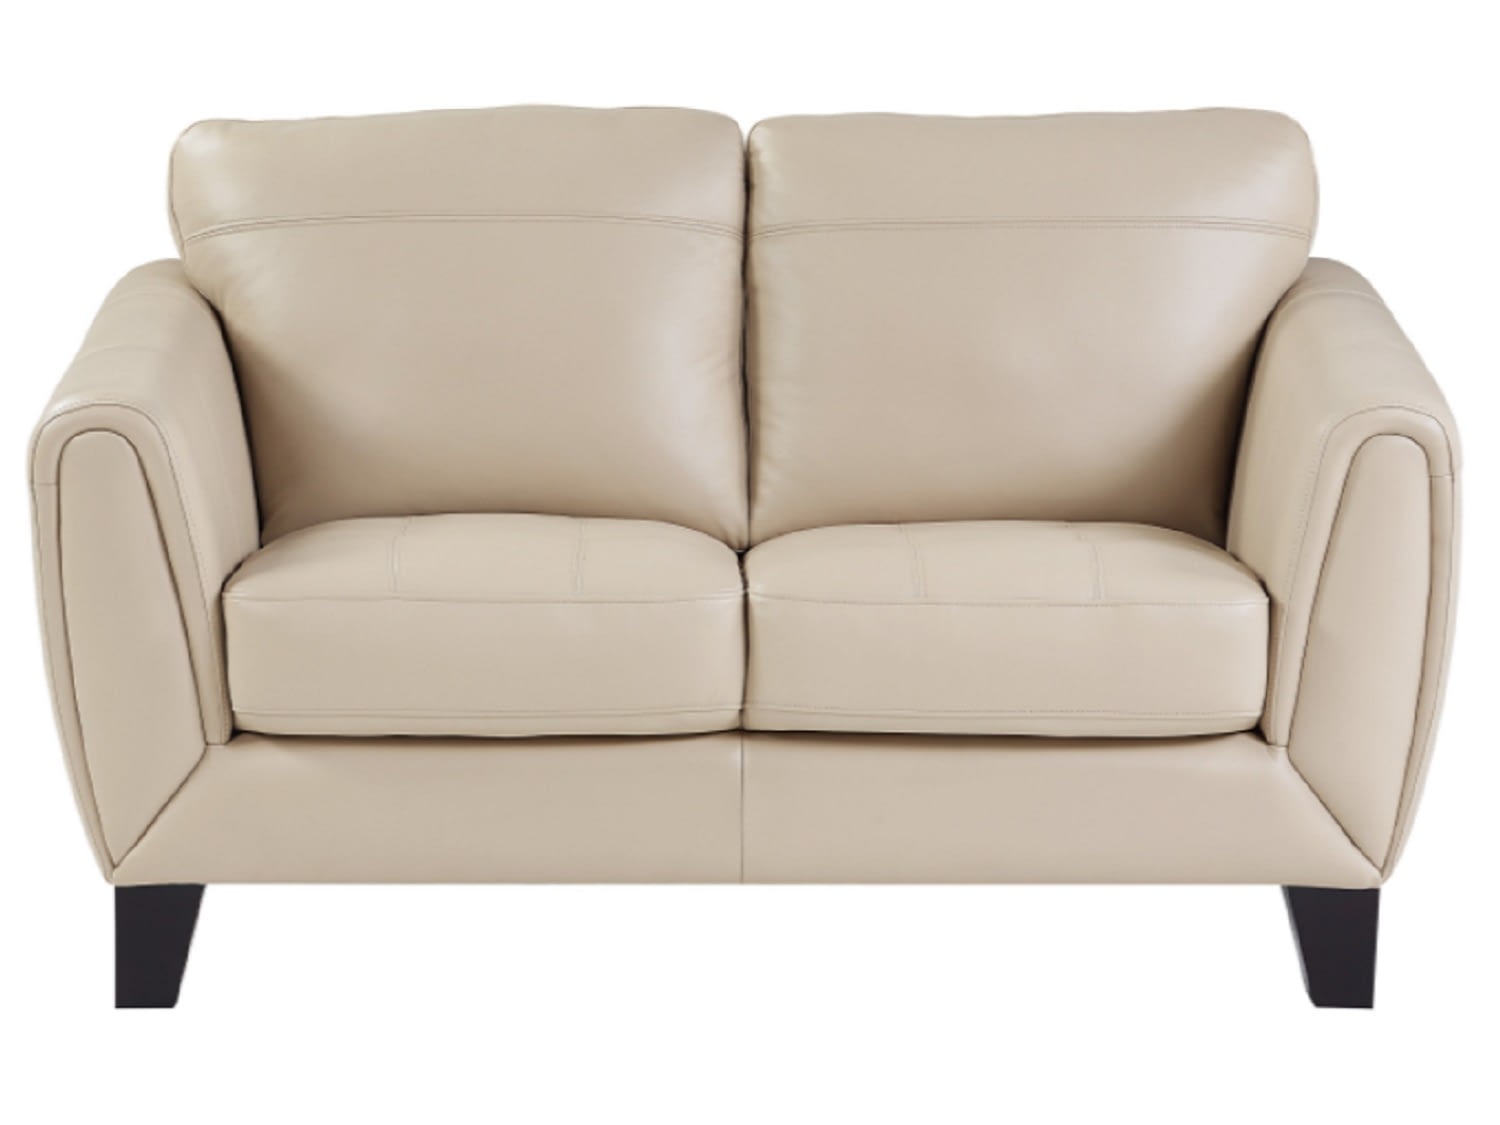 ROBLES Love-seat